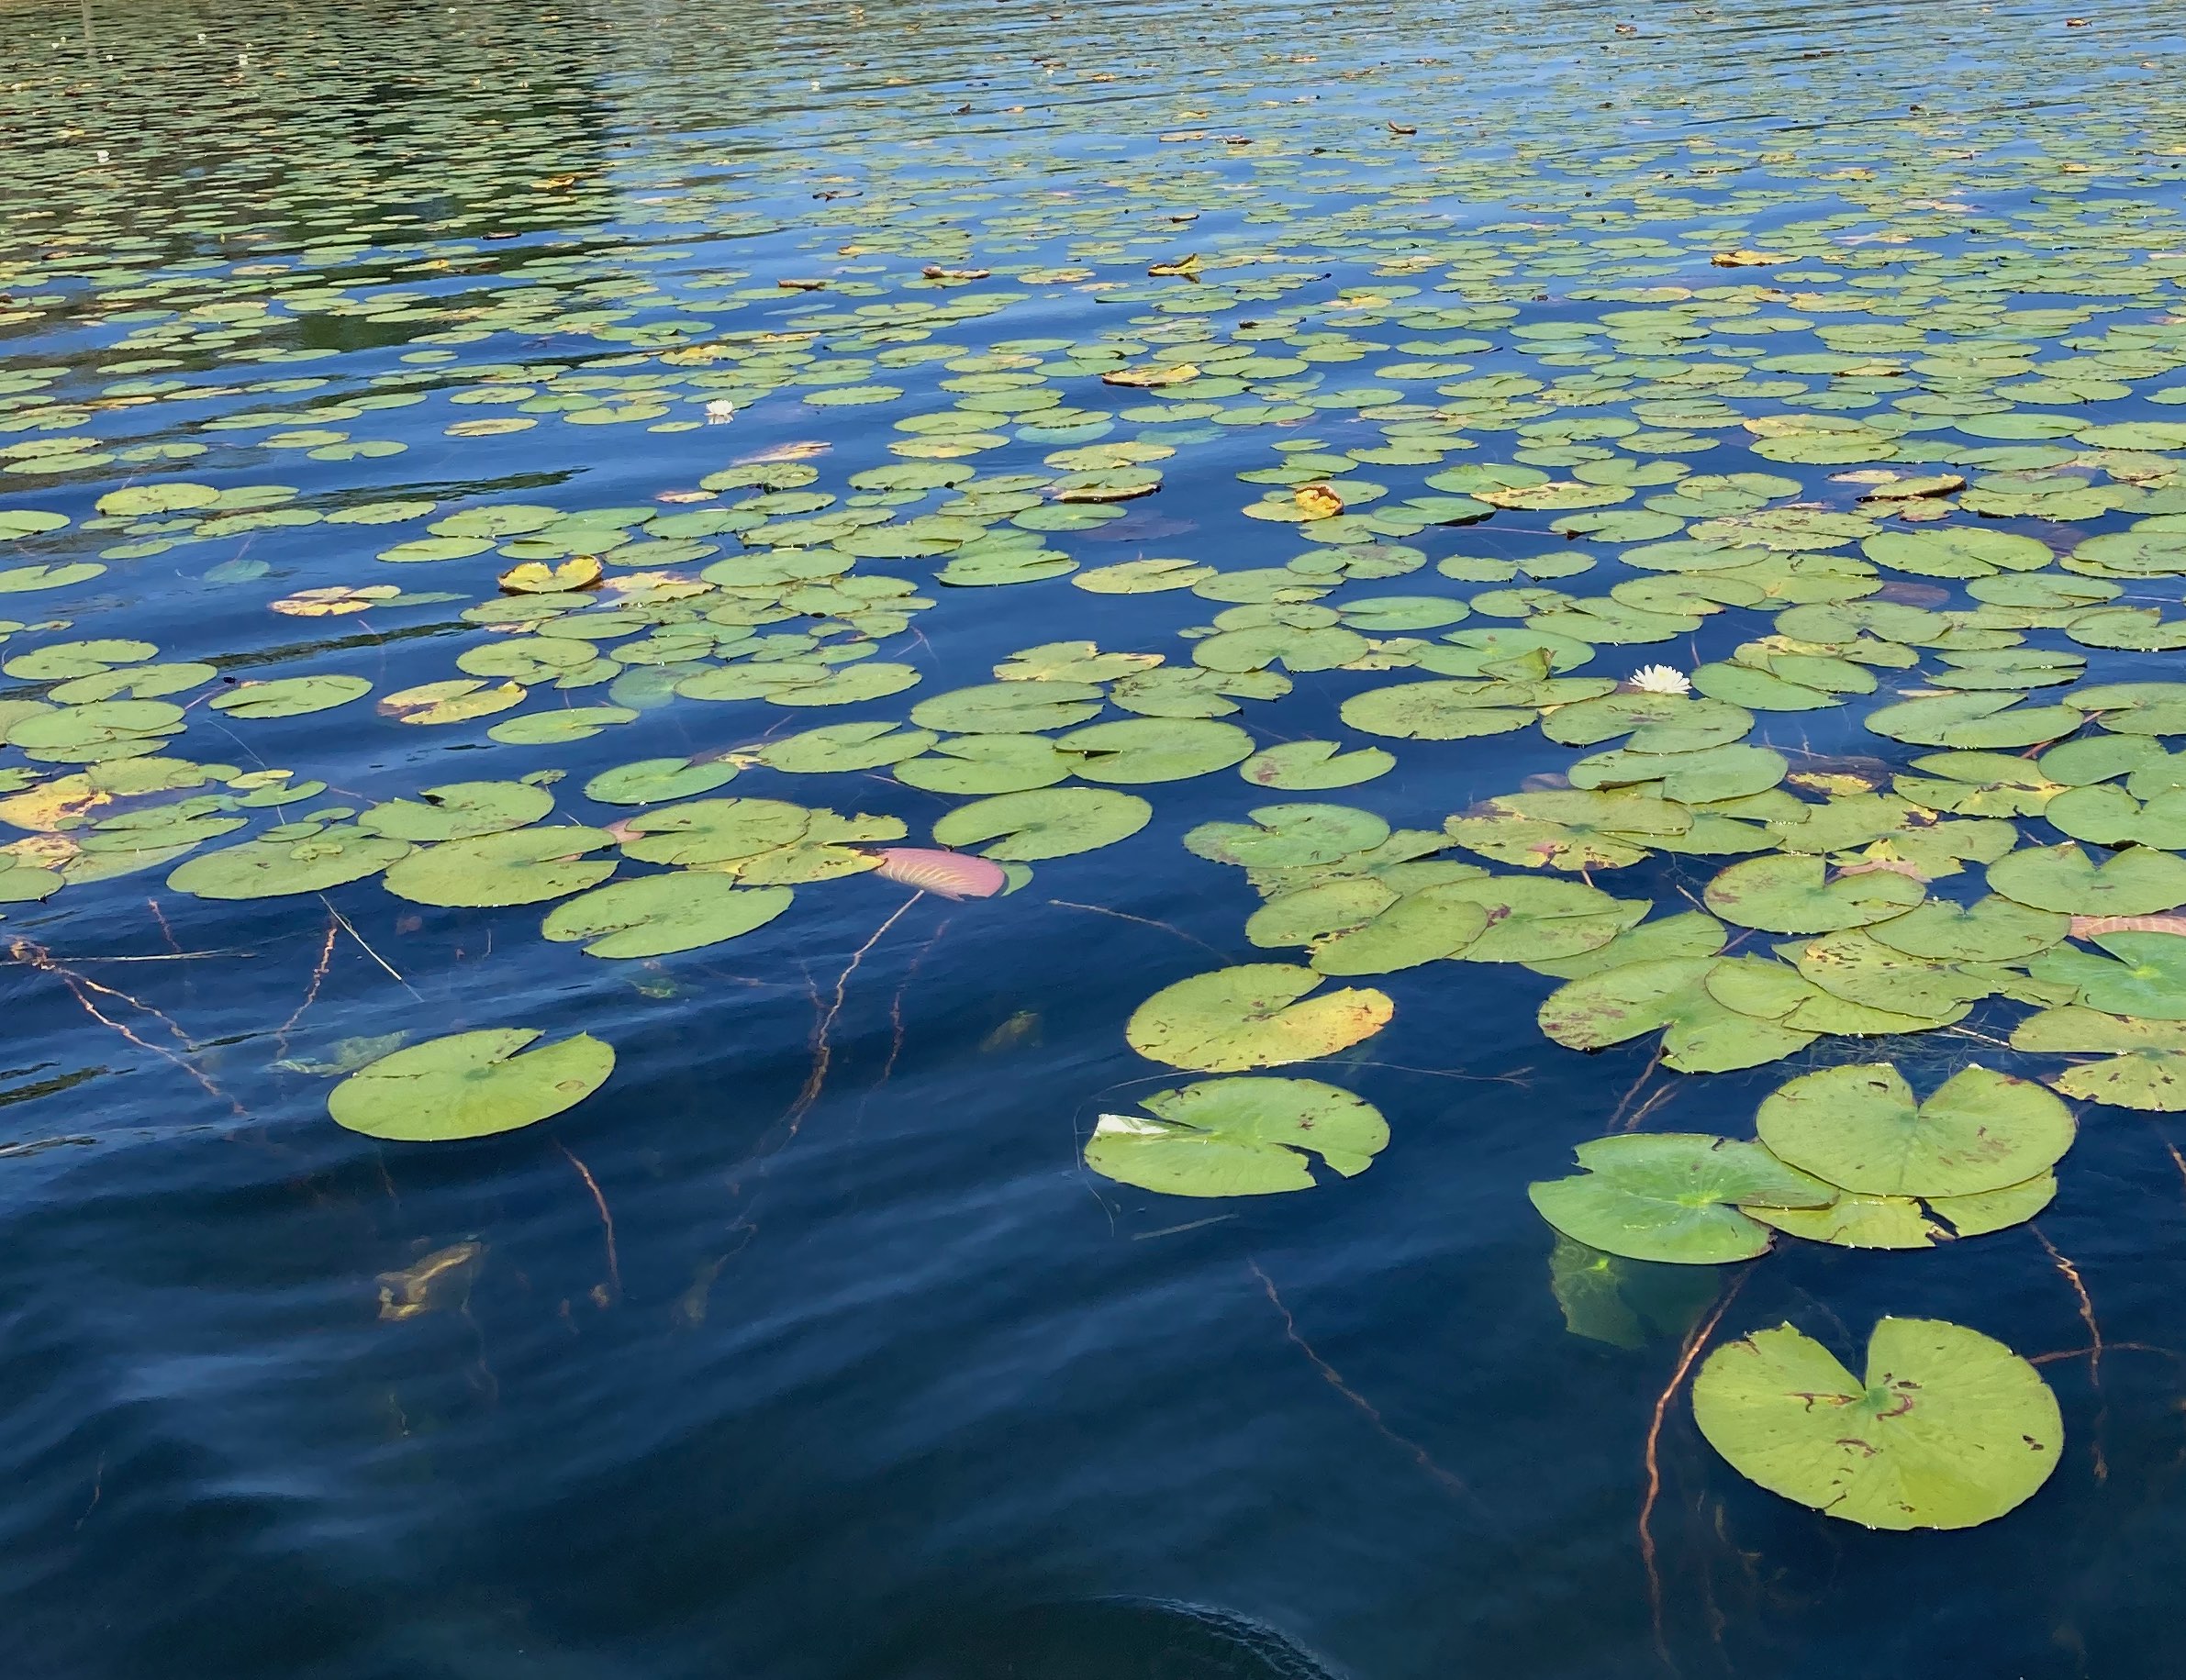 The Scientific Name is Nymphaea odorata ssp. odorata. You will likely hear them called American Water-lily, White Waterlily. This picture shows the  of Nymphaea odorata ssp. odorata